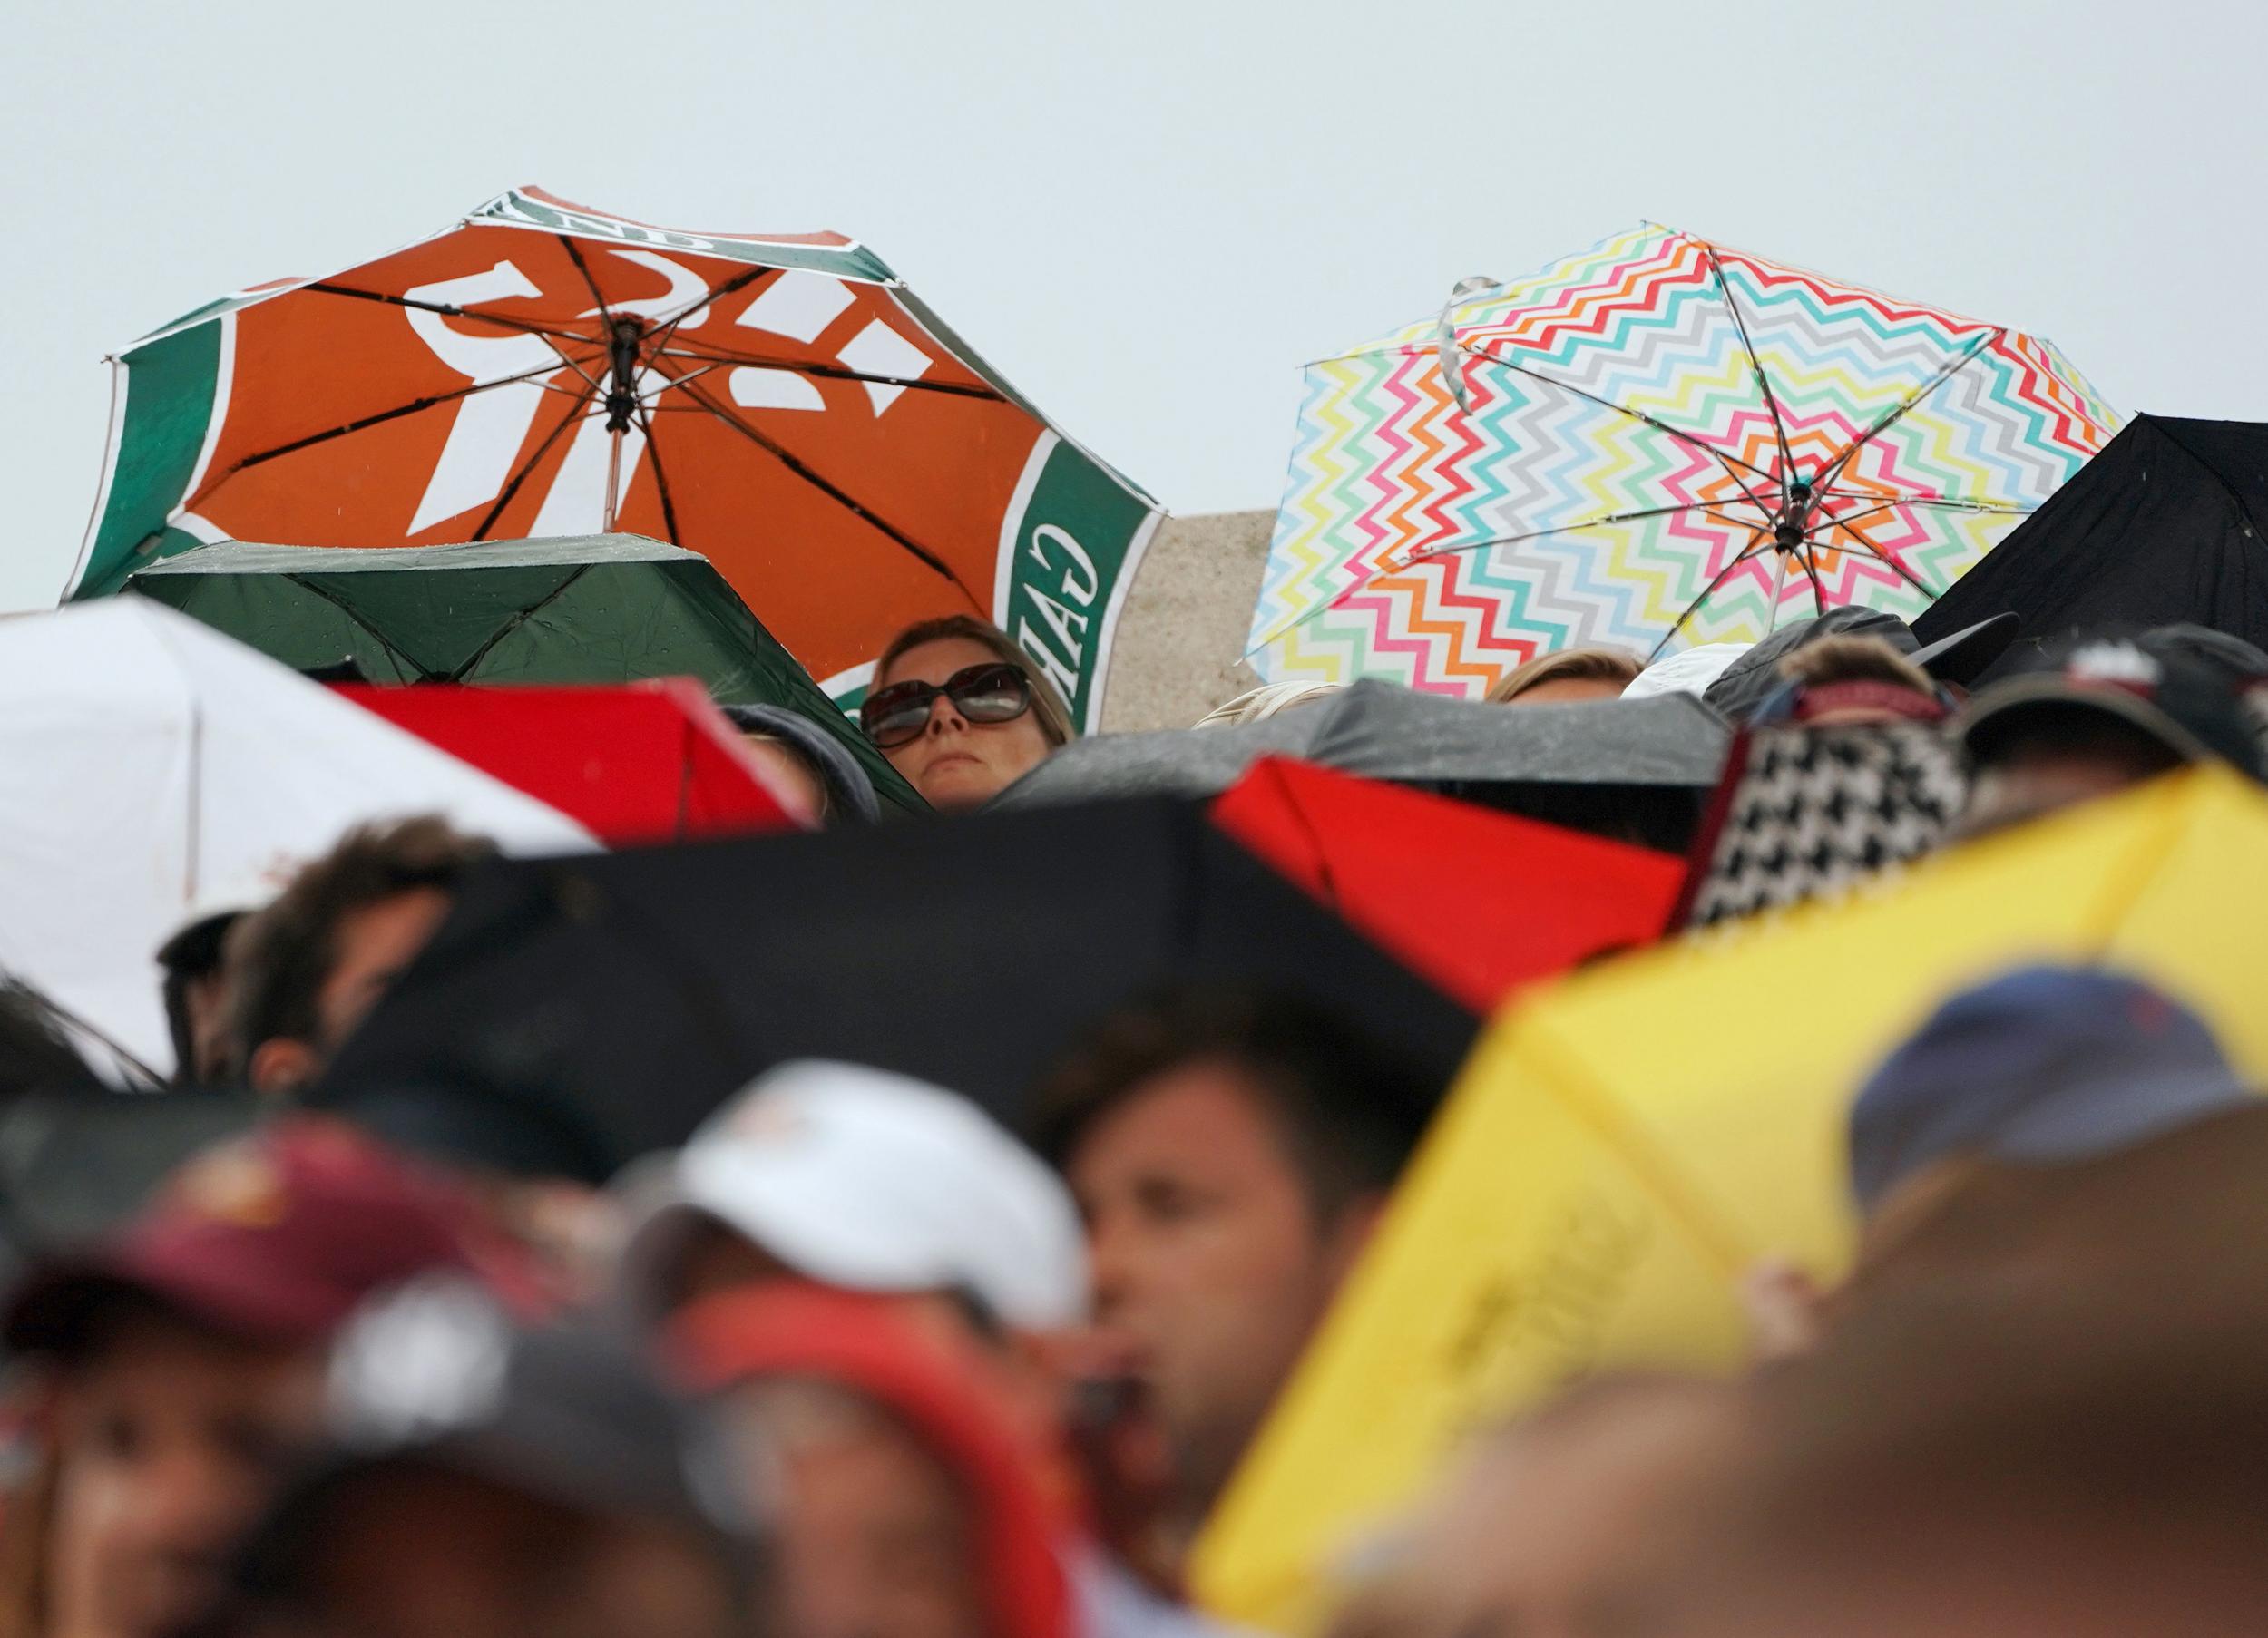 The rain just about held off on the sixth day of the French Open